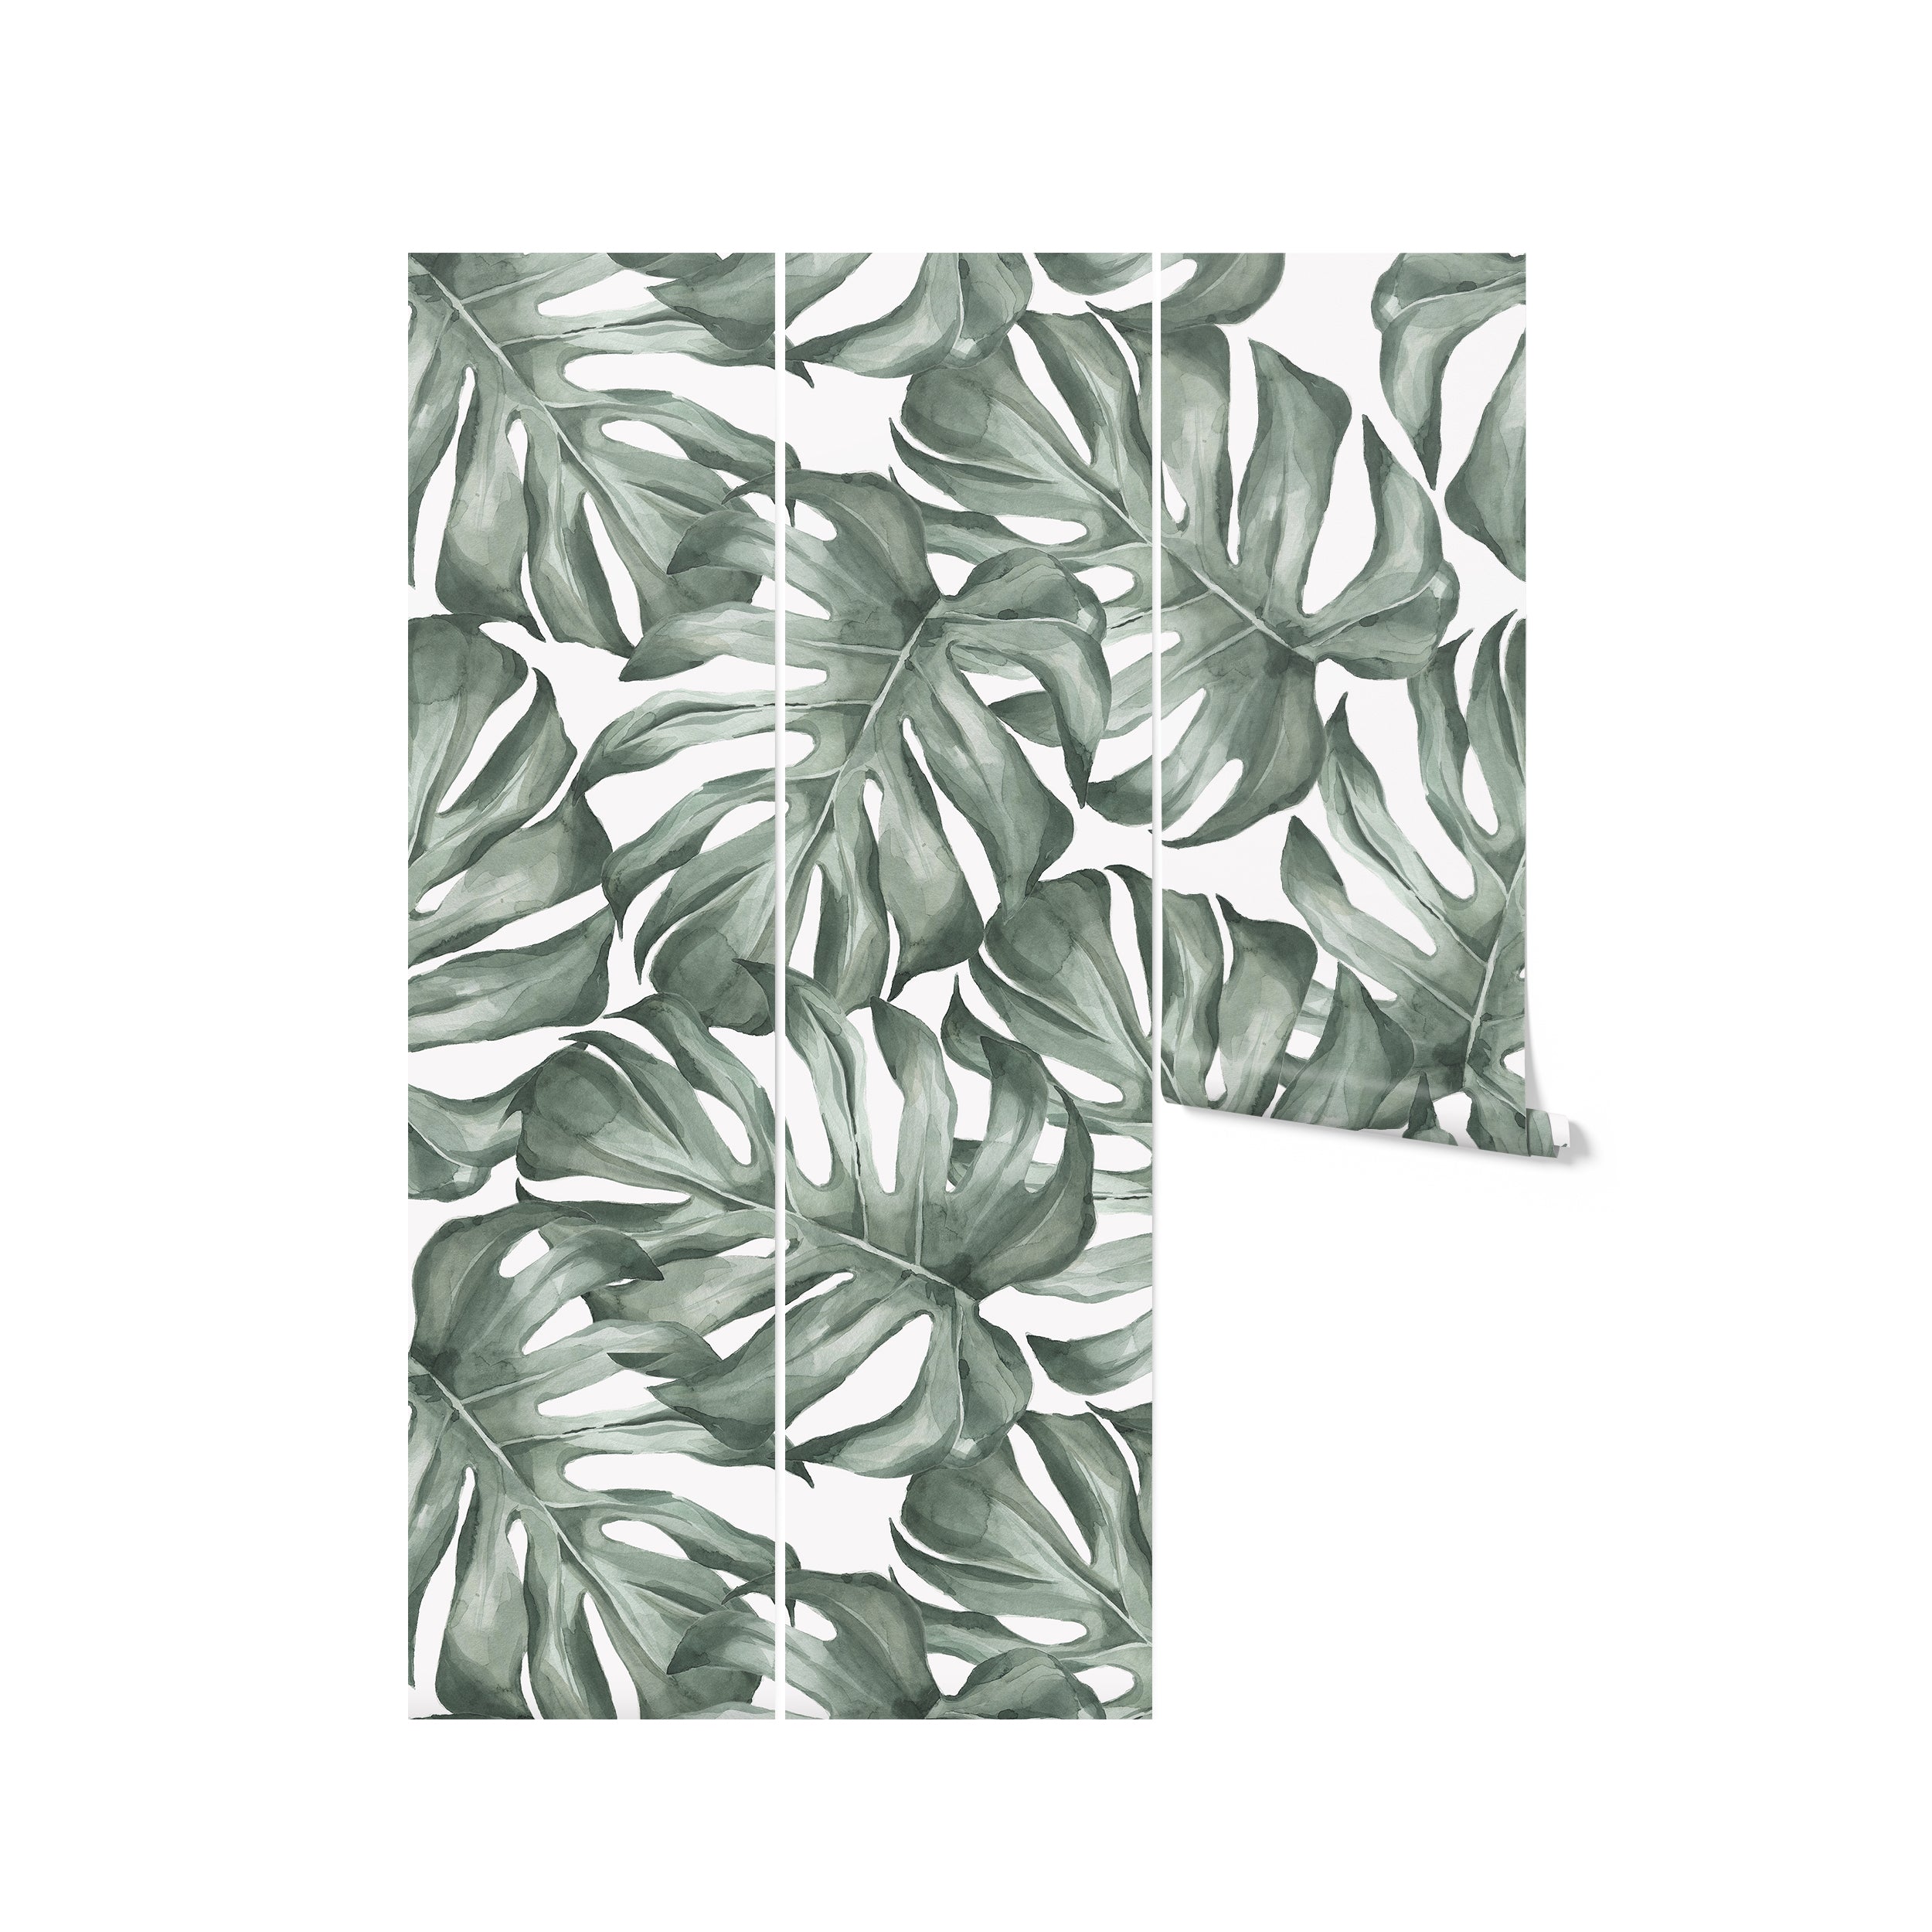 Three vertically hung panels displaying the Modern Monstera Wallpaper. The continuity of the leaf design across the panels showcases the dynamic and lush pattern, making it a striking choice for any room looking to make a statement with botanical themes.